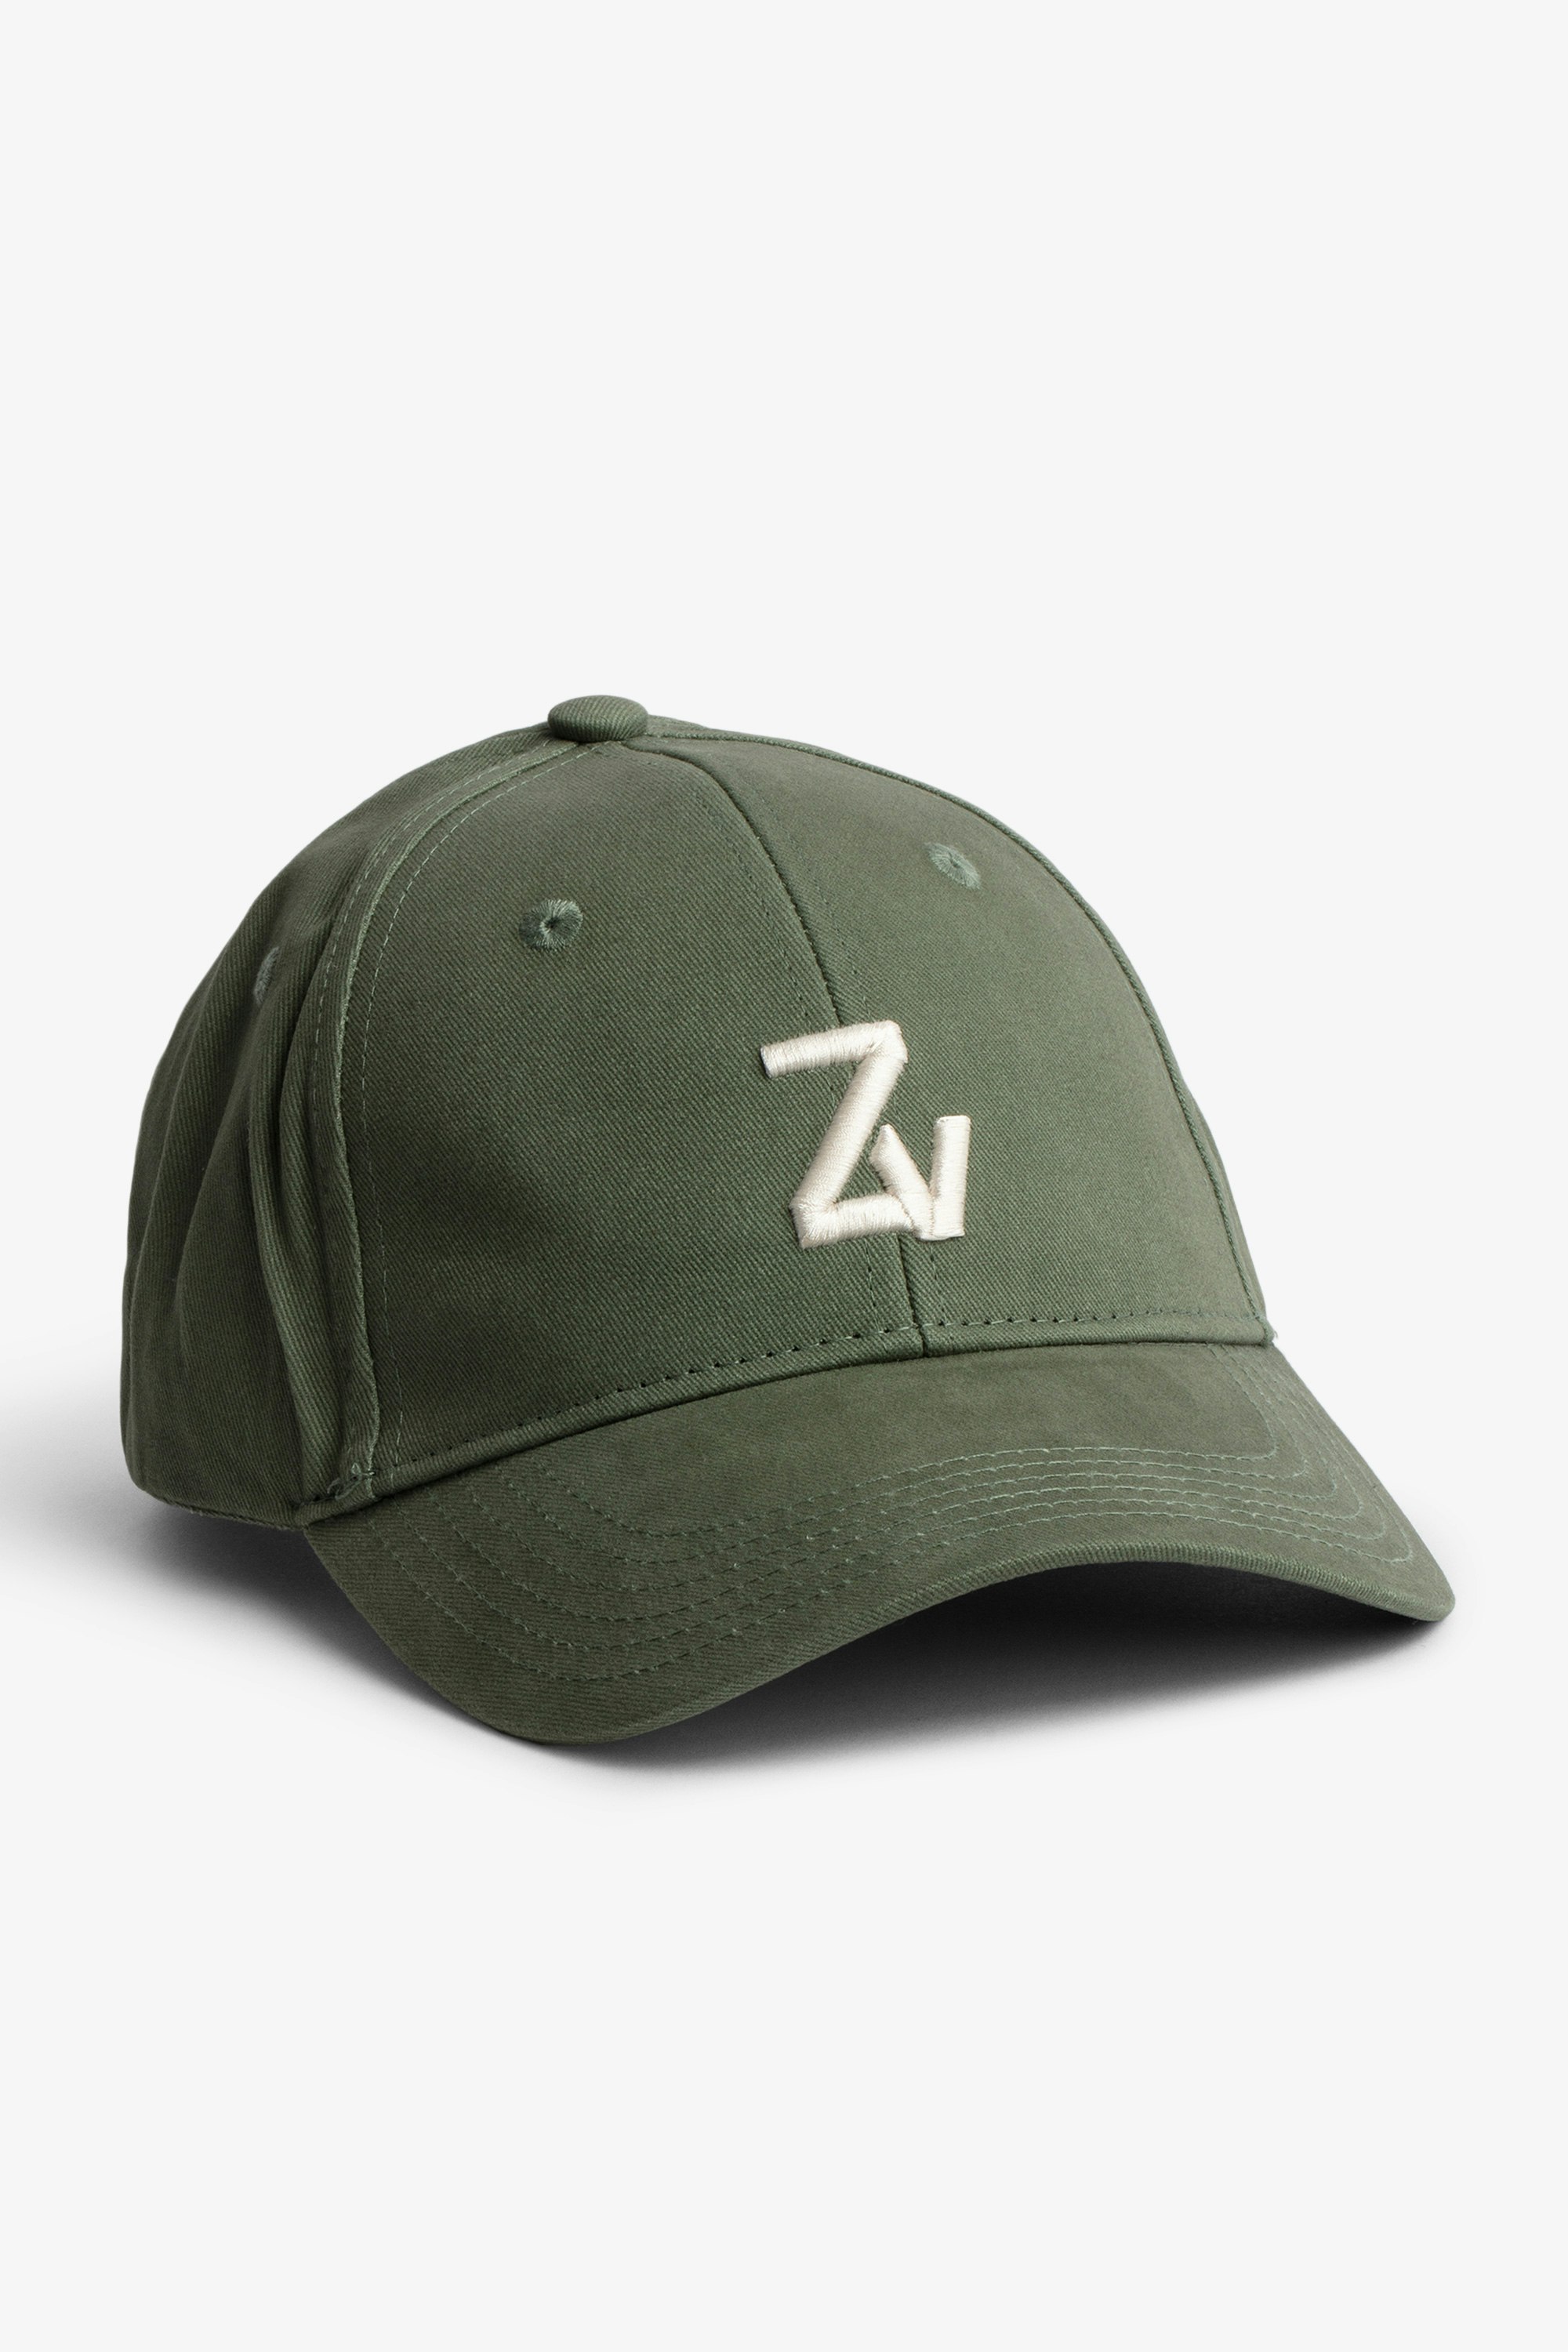 ZV Initiale Klelia キャップ Cotton cap embroidered with the ZV initials.